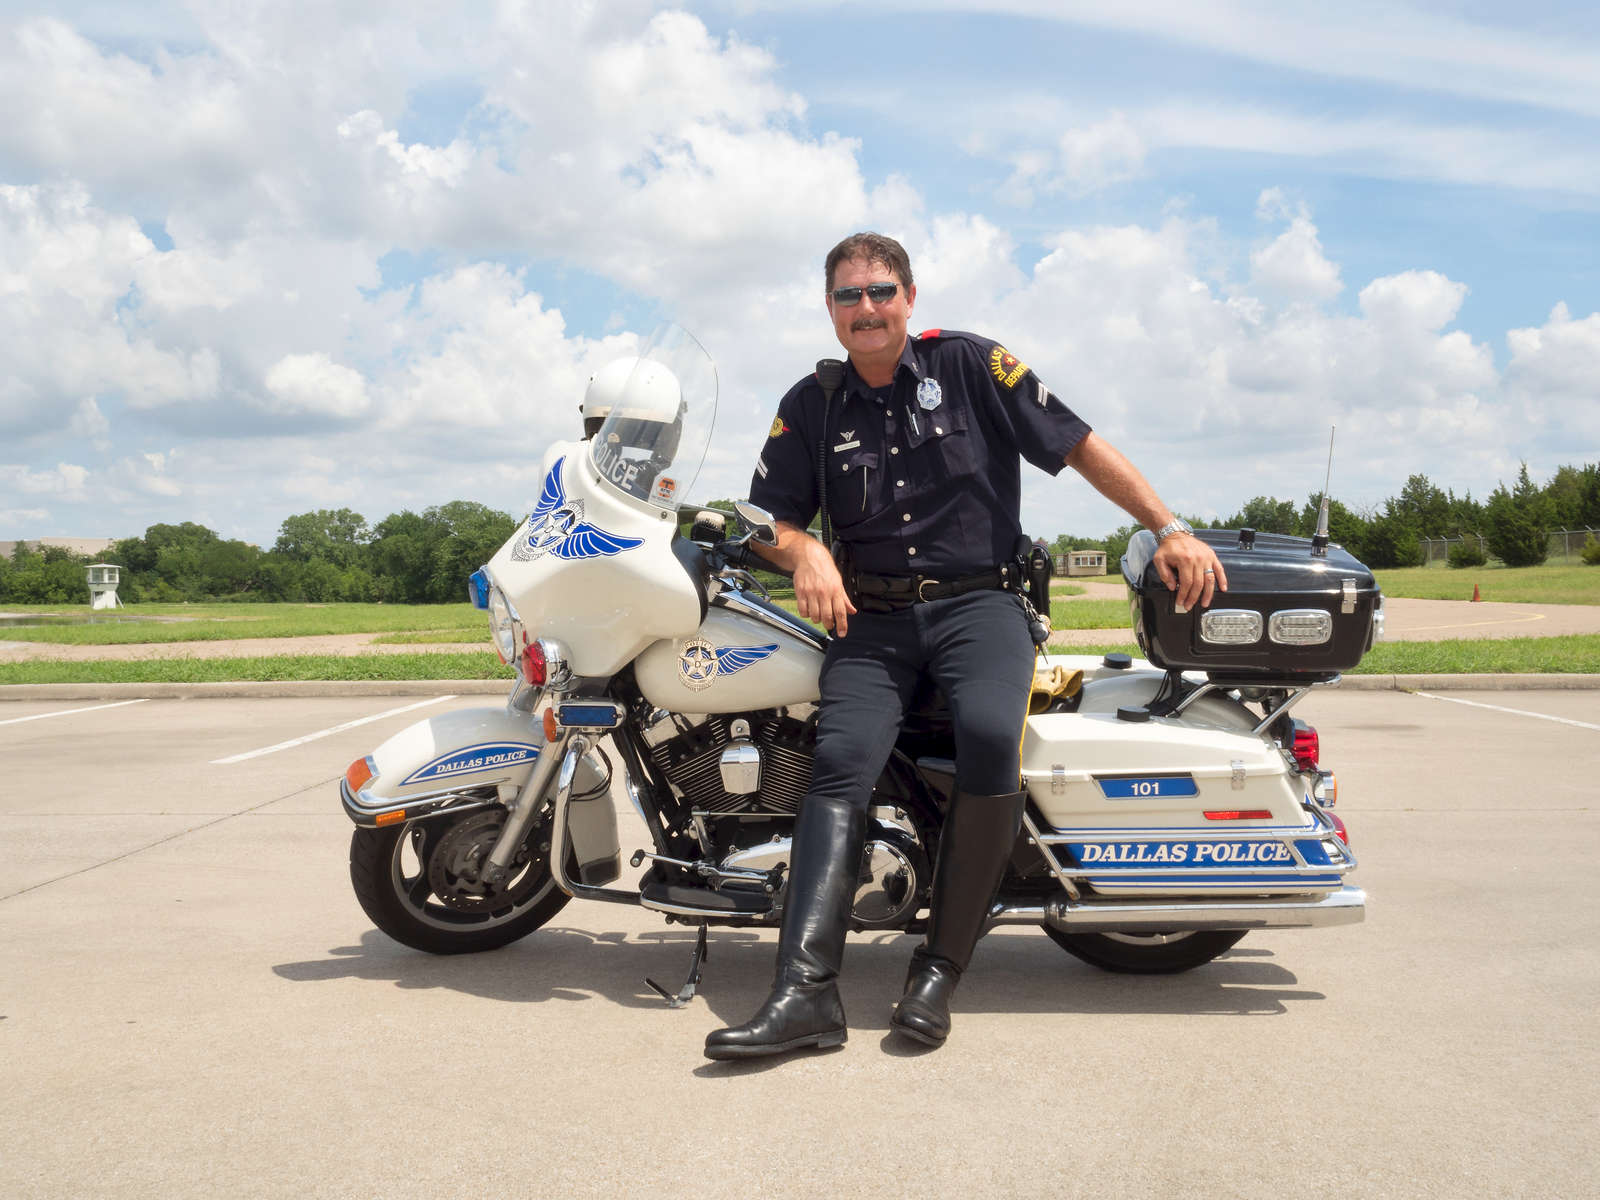 Motorcycle unit police officer Mike J Mitchell volunteers at the basic day training of the Dallas Junior Police Academy. His Harley Davidson bike weighs around 850lb and can do 110 miles an hour; he has been in the police for 26 years and hopes to retire in two.Dallas is a major city in Texas and is the largest urban center of the fourth most populous metropolitan area in the United States. The city ranks ninth in the U.S. and third in Texas after Houston and San Antonio. The city's prominence arose from its historical importance as a center for the oil and cotton industries, and its position along numerous railroad lines.For two weeks in the summer of 2015, photographer Peter Dench visited Dallas to document the metroplex in his epic reportage, DENCH DOES DALLAS.Photographed using an Olympus E-M5 Mark II©Peter Dench/Getty Images Reportage